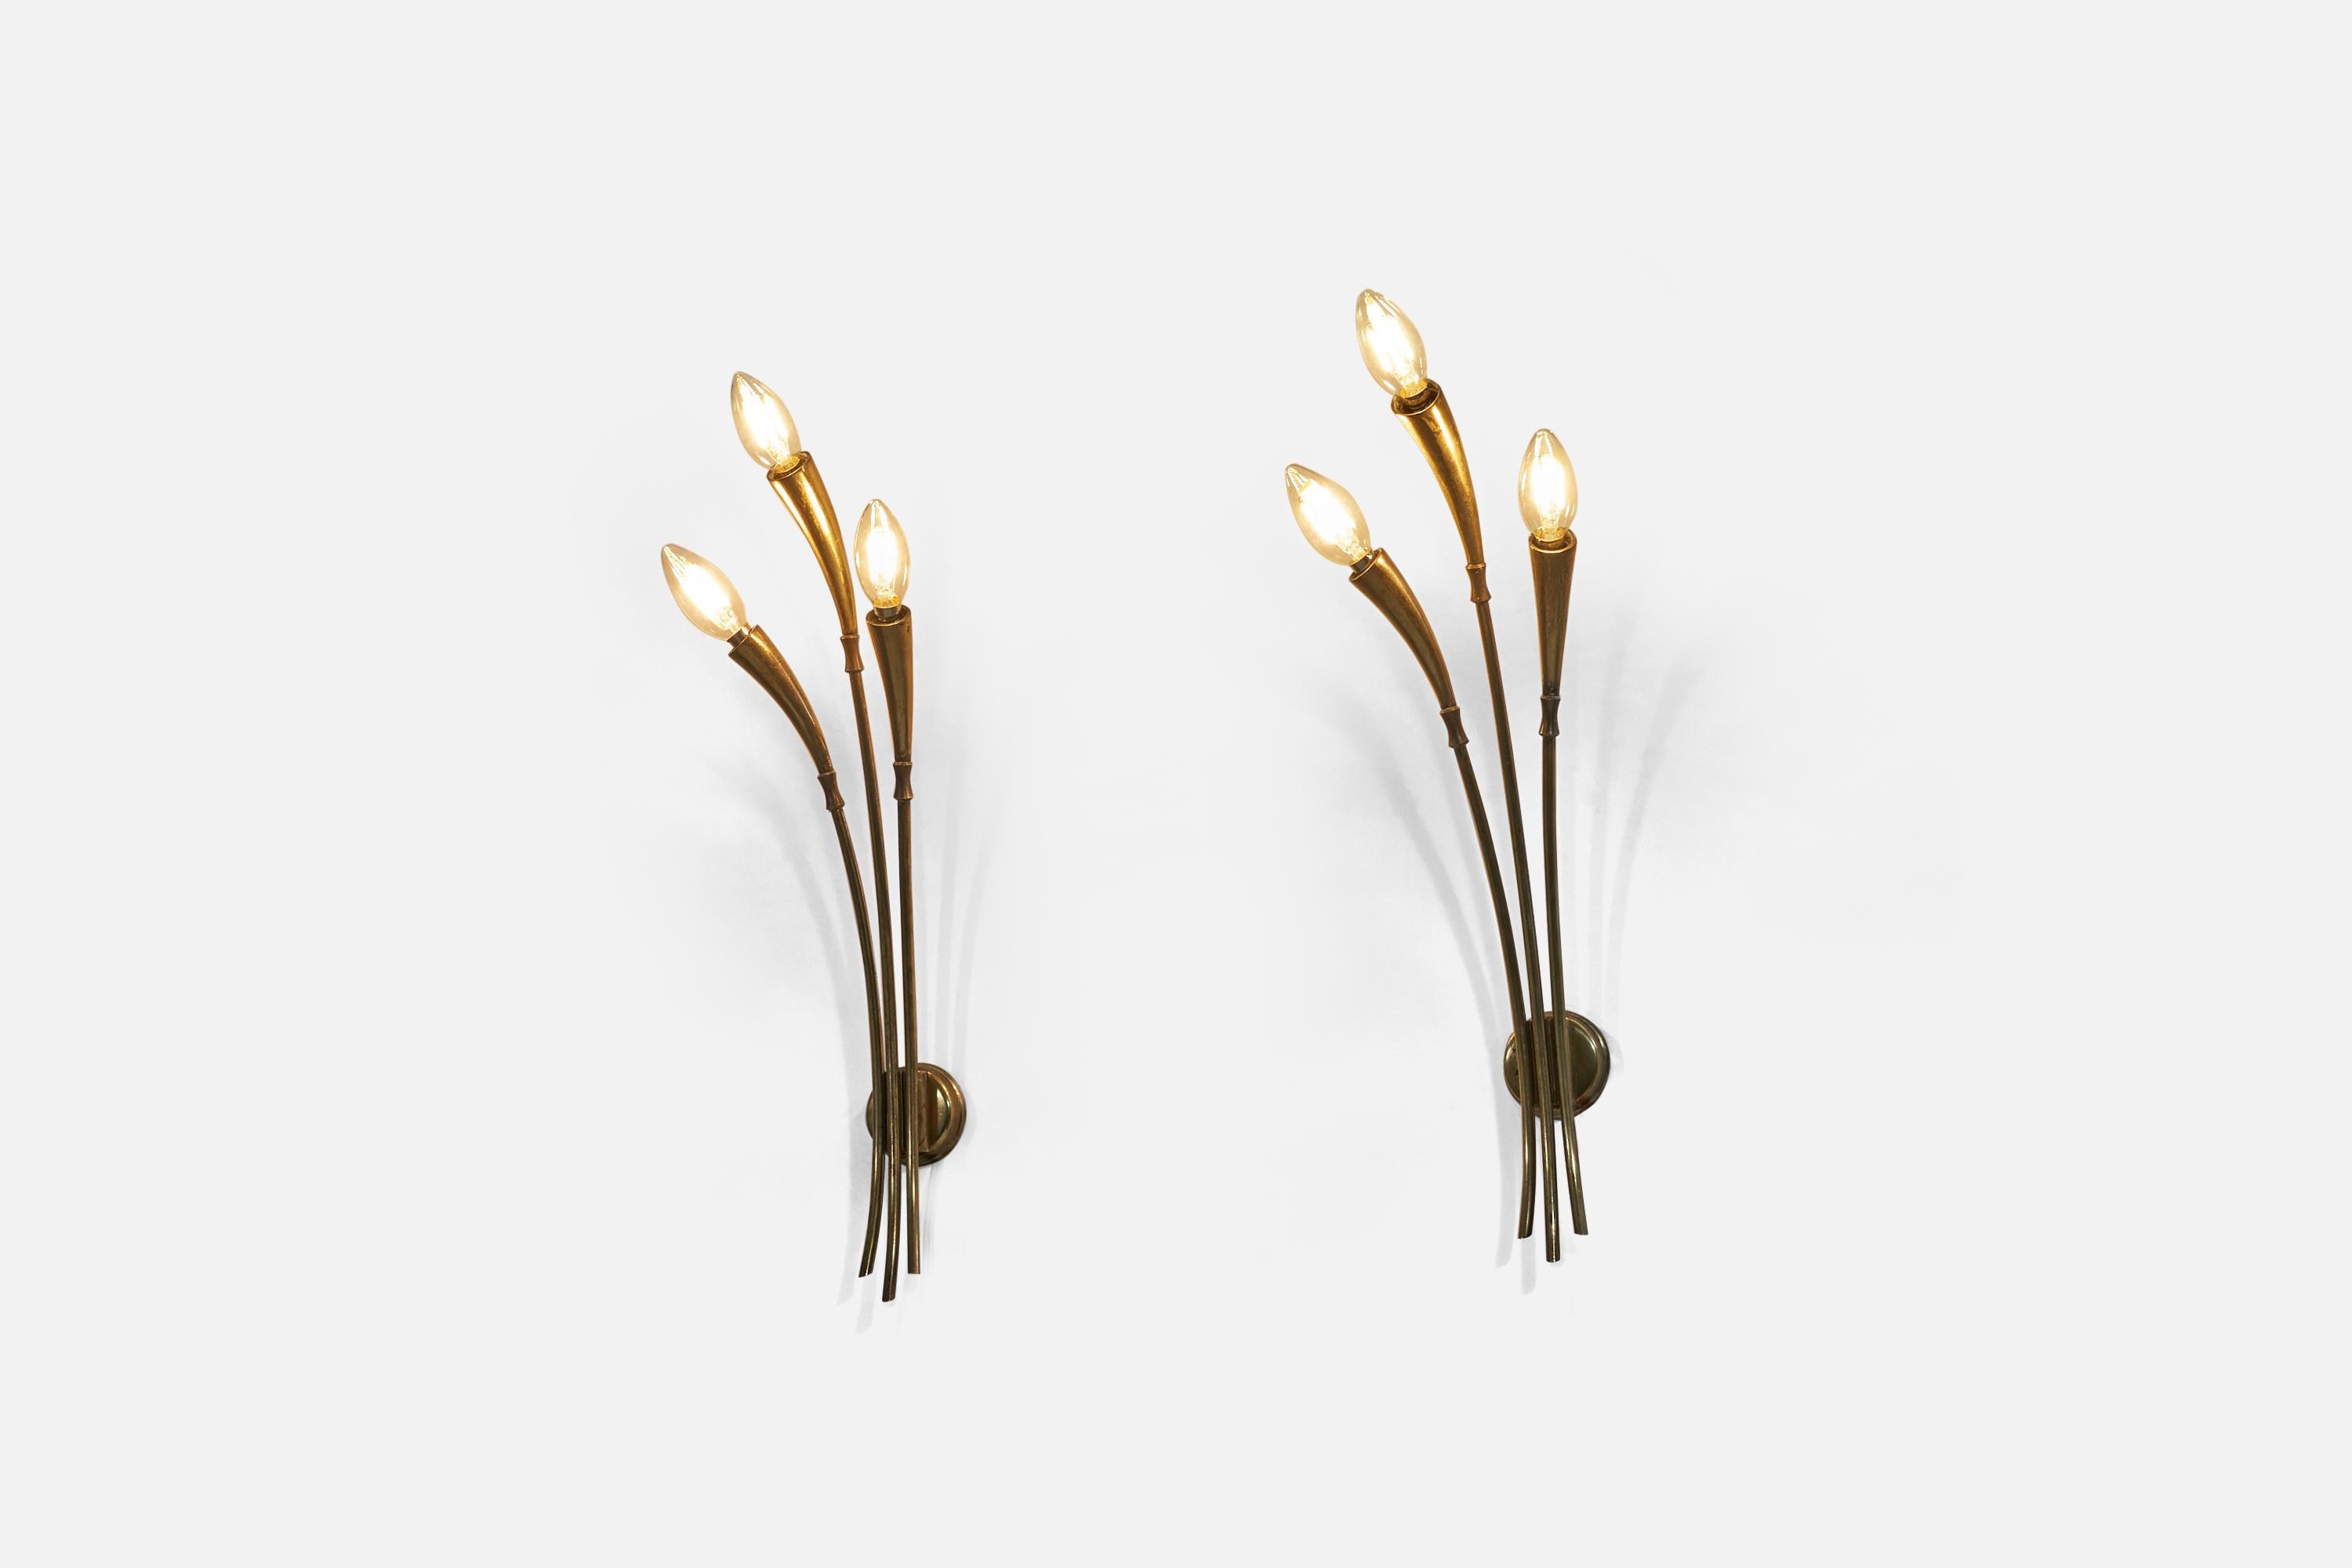 Mid-20th Century Italian Designer, Pair Of 3-light Wall Sconces, Brass, Italy, c. 1940s For Sale